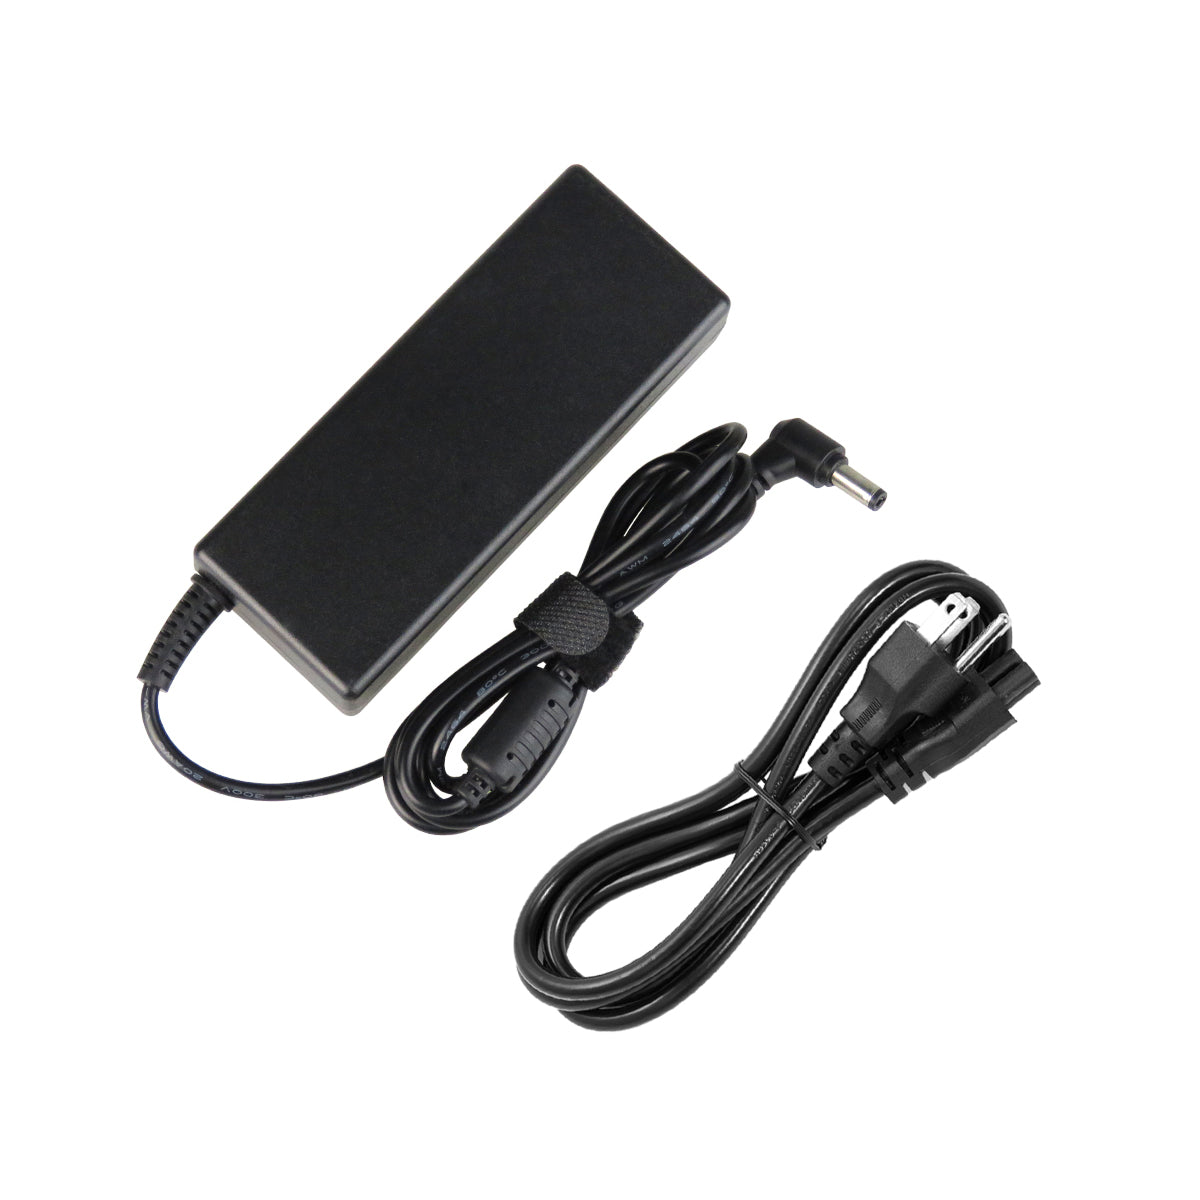 AC Adapter Charger for Gateway M460 Notebook.